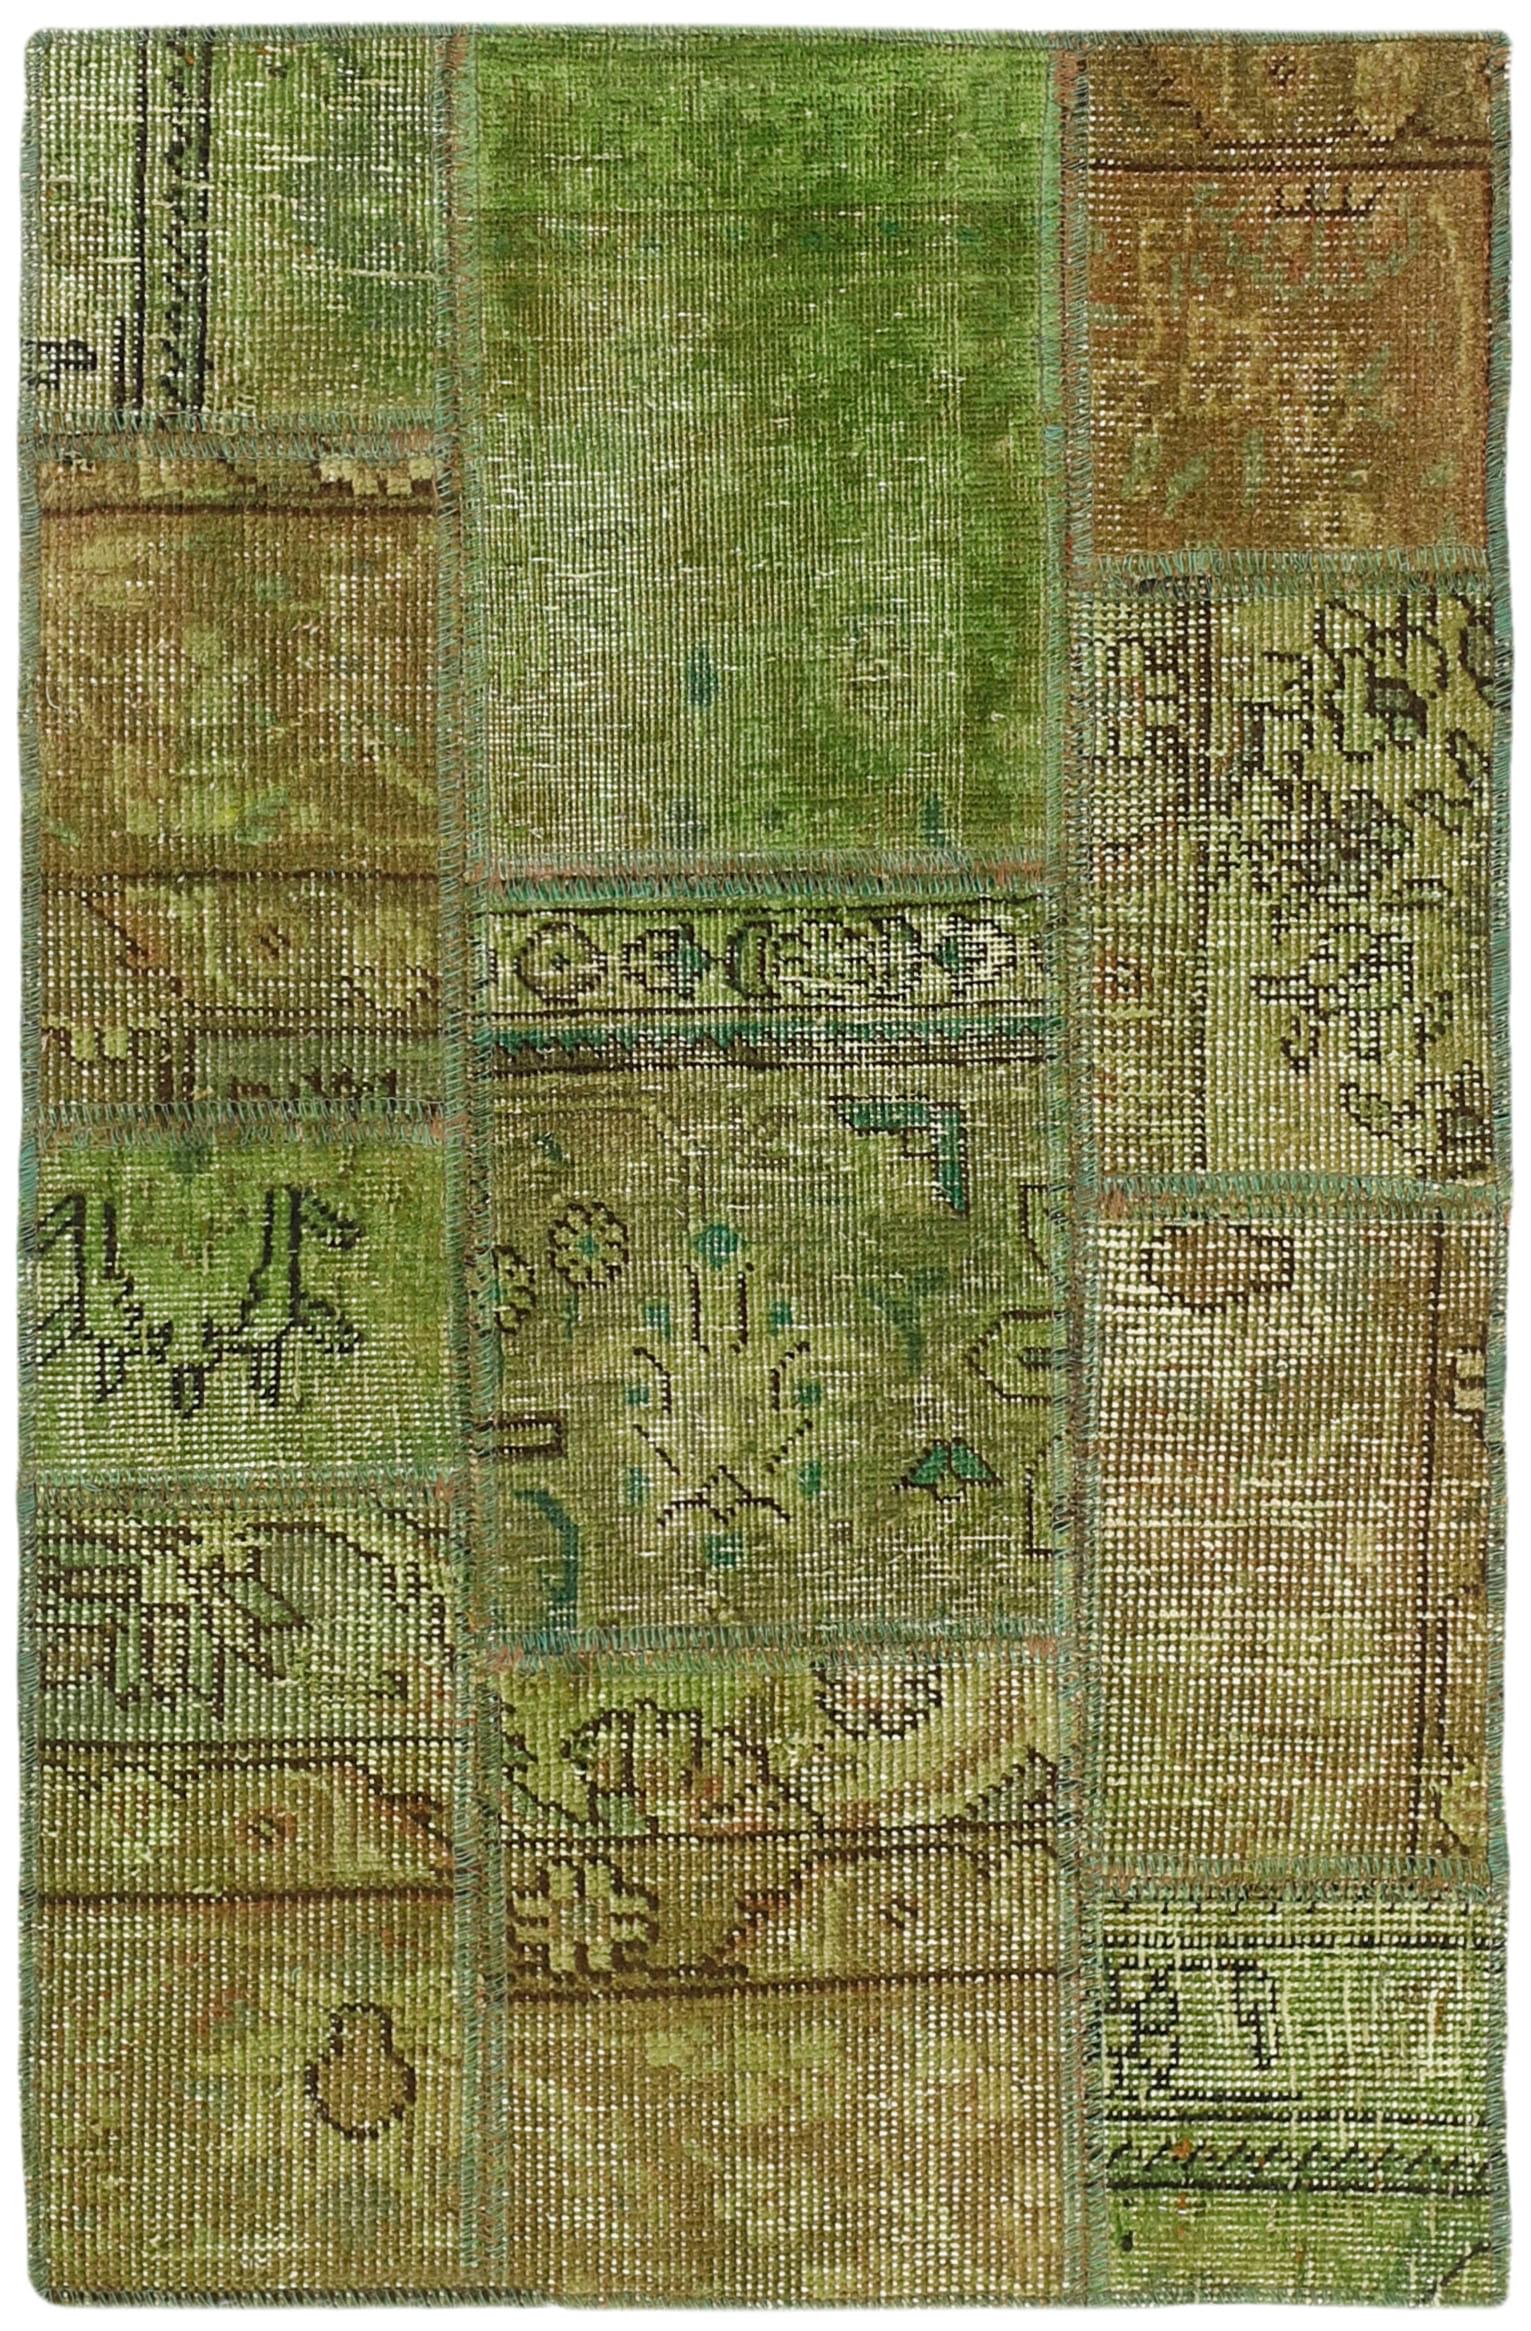 Authentic green patchwork persian rug